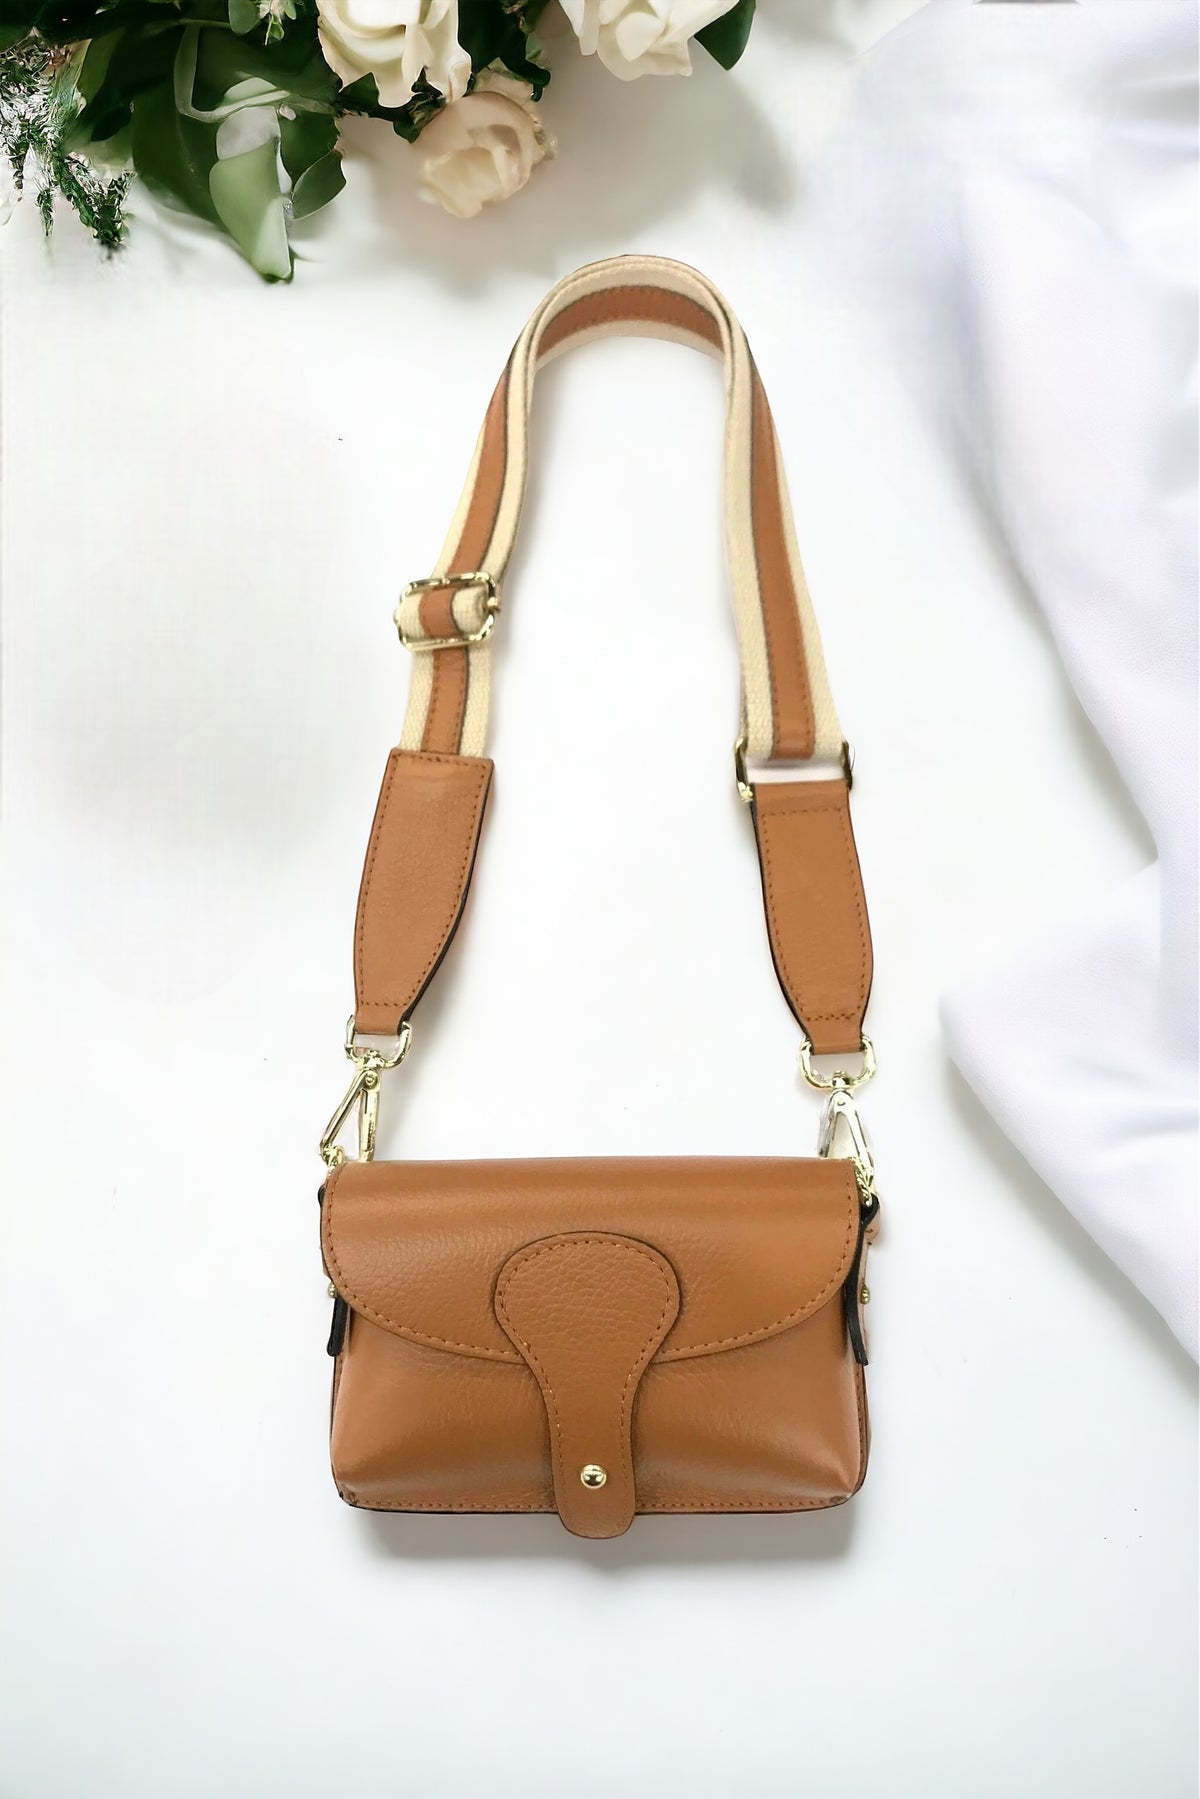 Mini Leather Messenger Crossbody Bag - Tan-240 Bags-BC Handbags-Coastal Bloom Boutique, find the trendiest versions of the popular styles and looks Located in Indialantic, FL